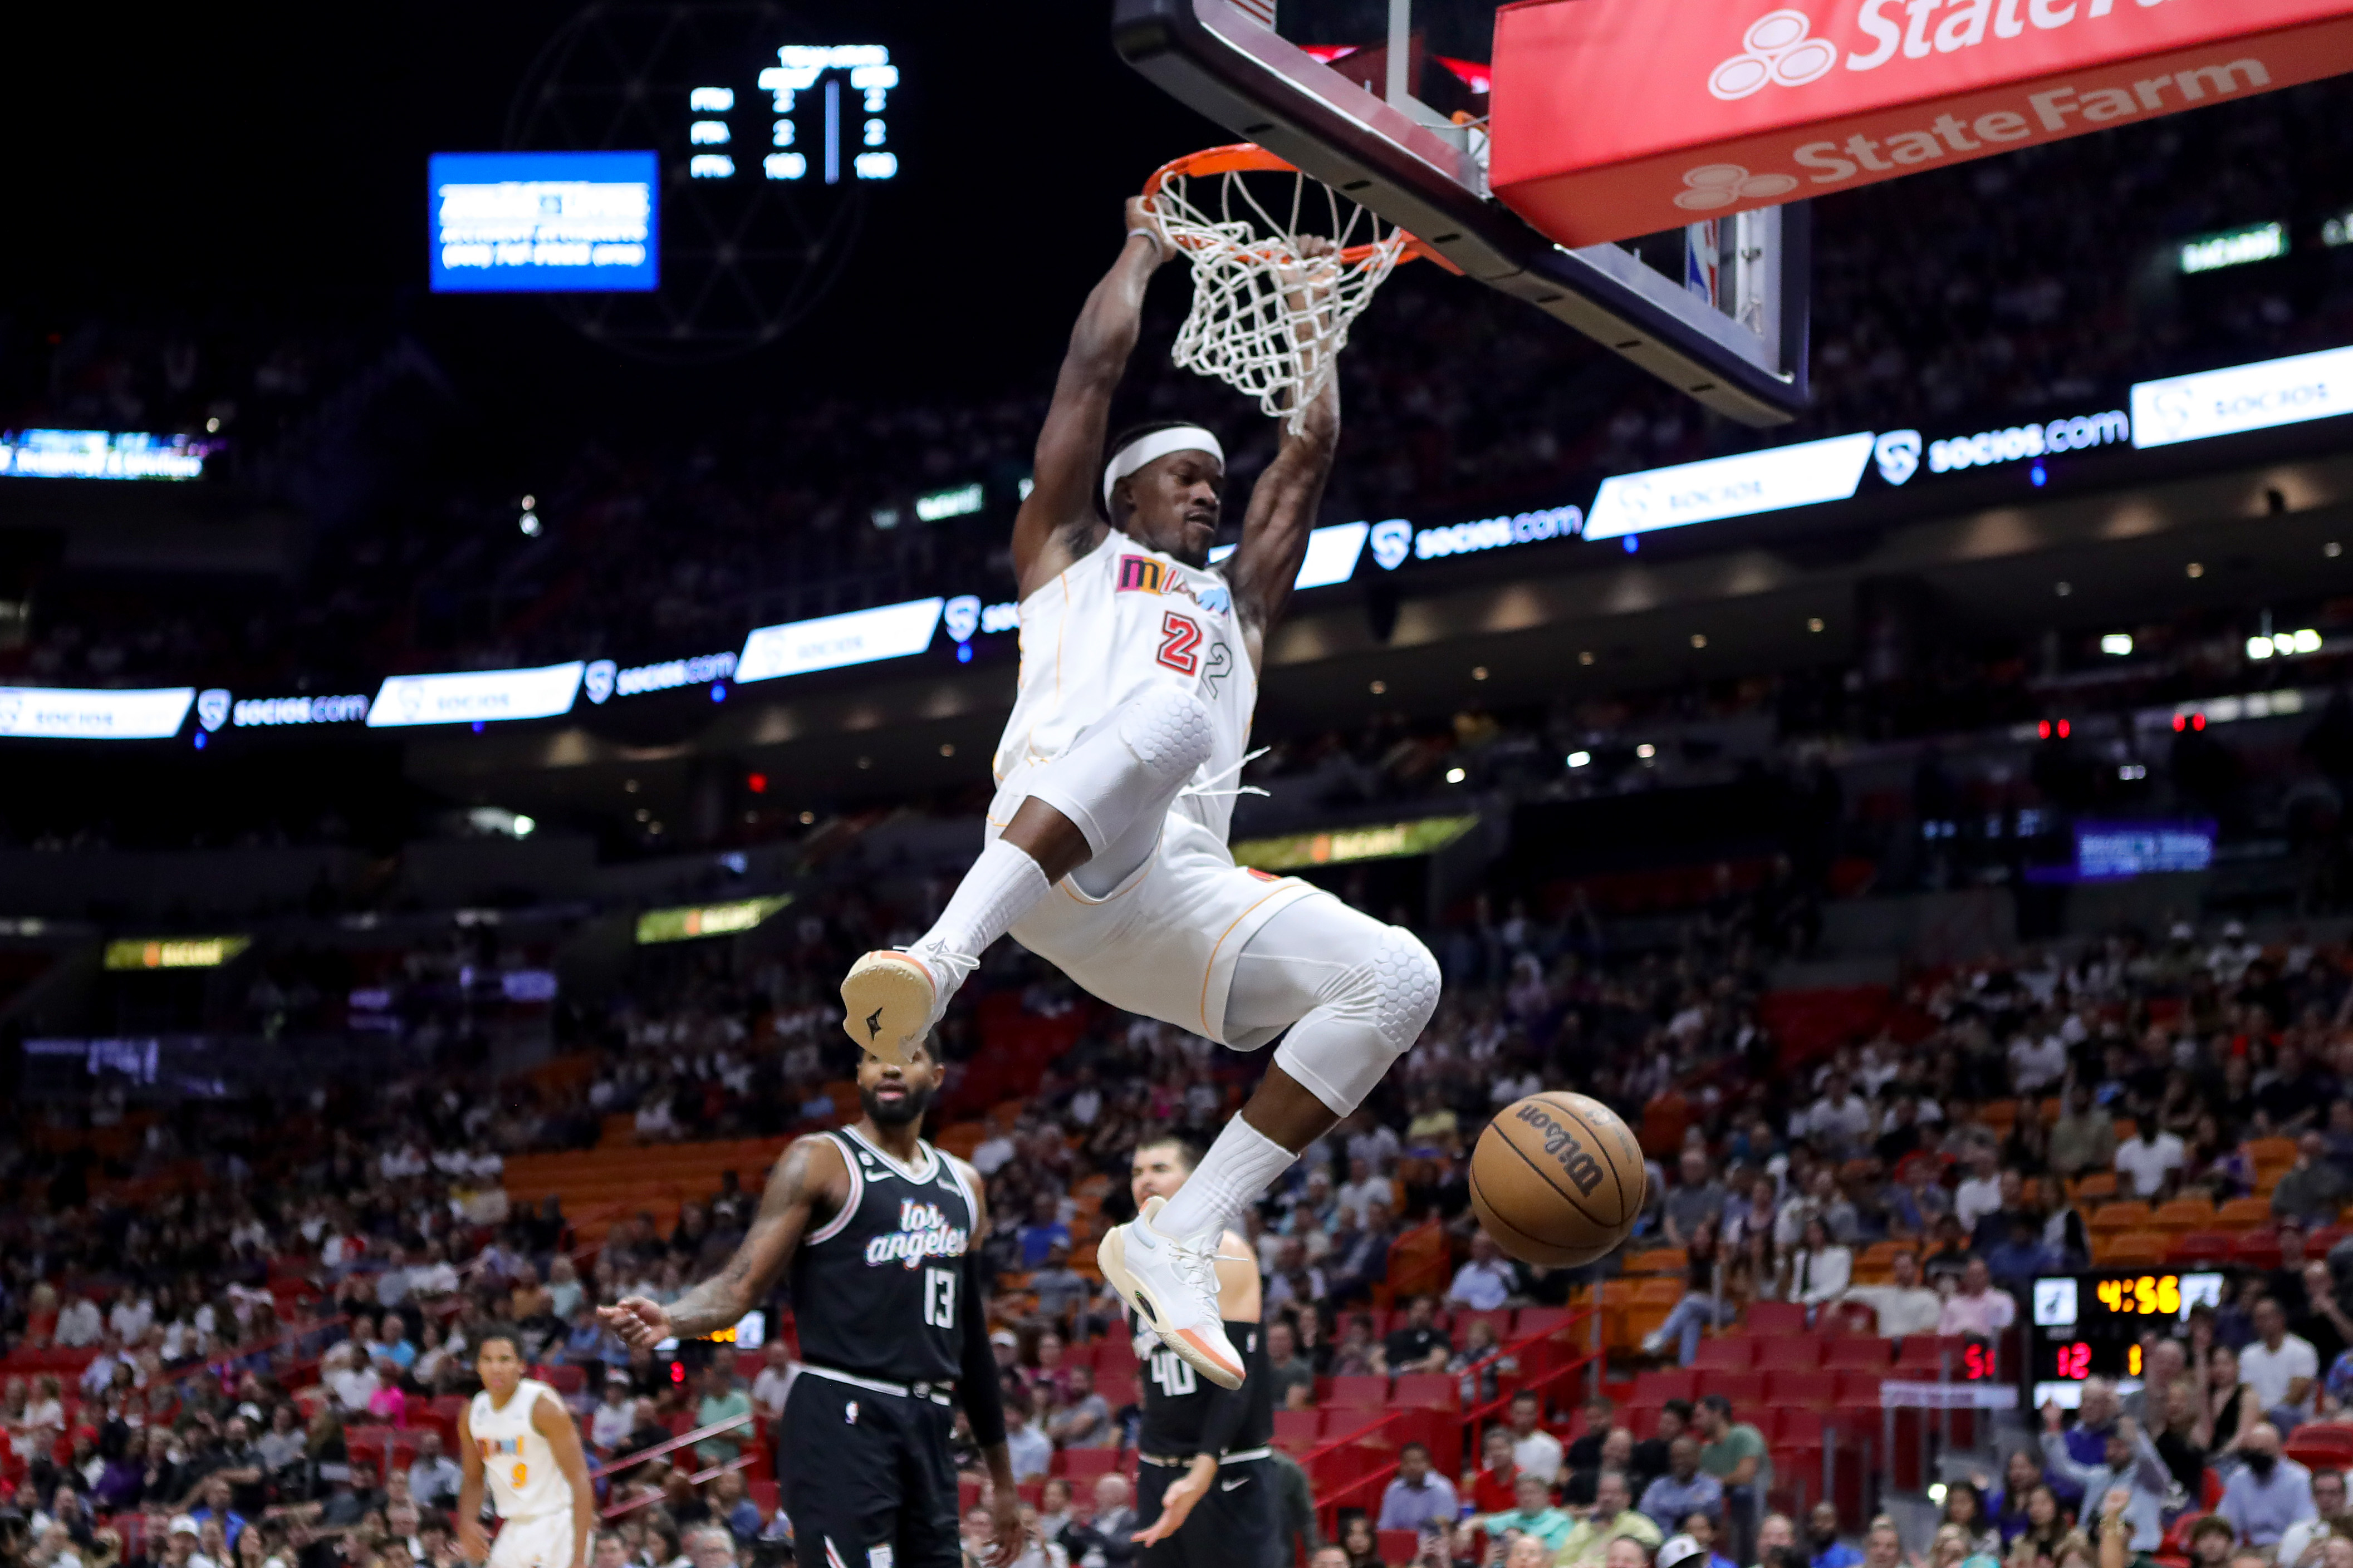 Herro hits 10 3s, scores career-high 41 points for Heat in win over Rockets